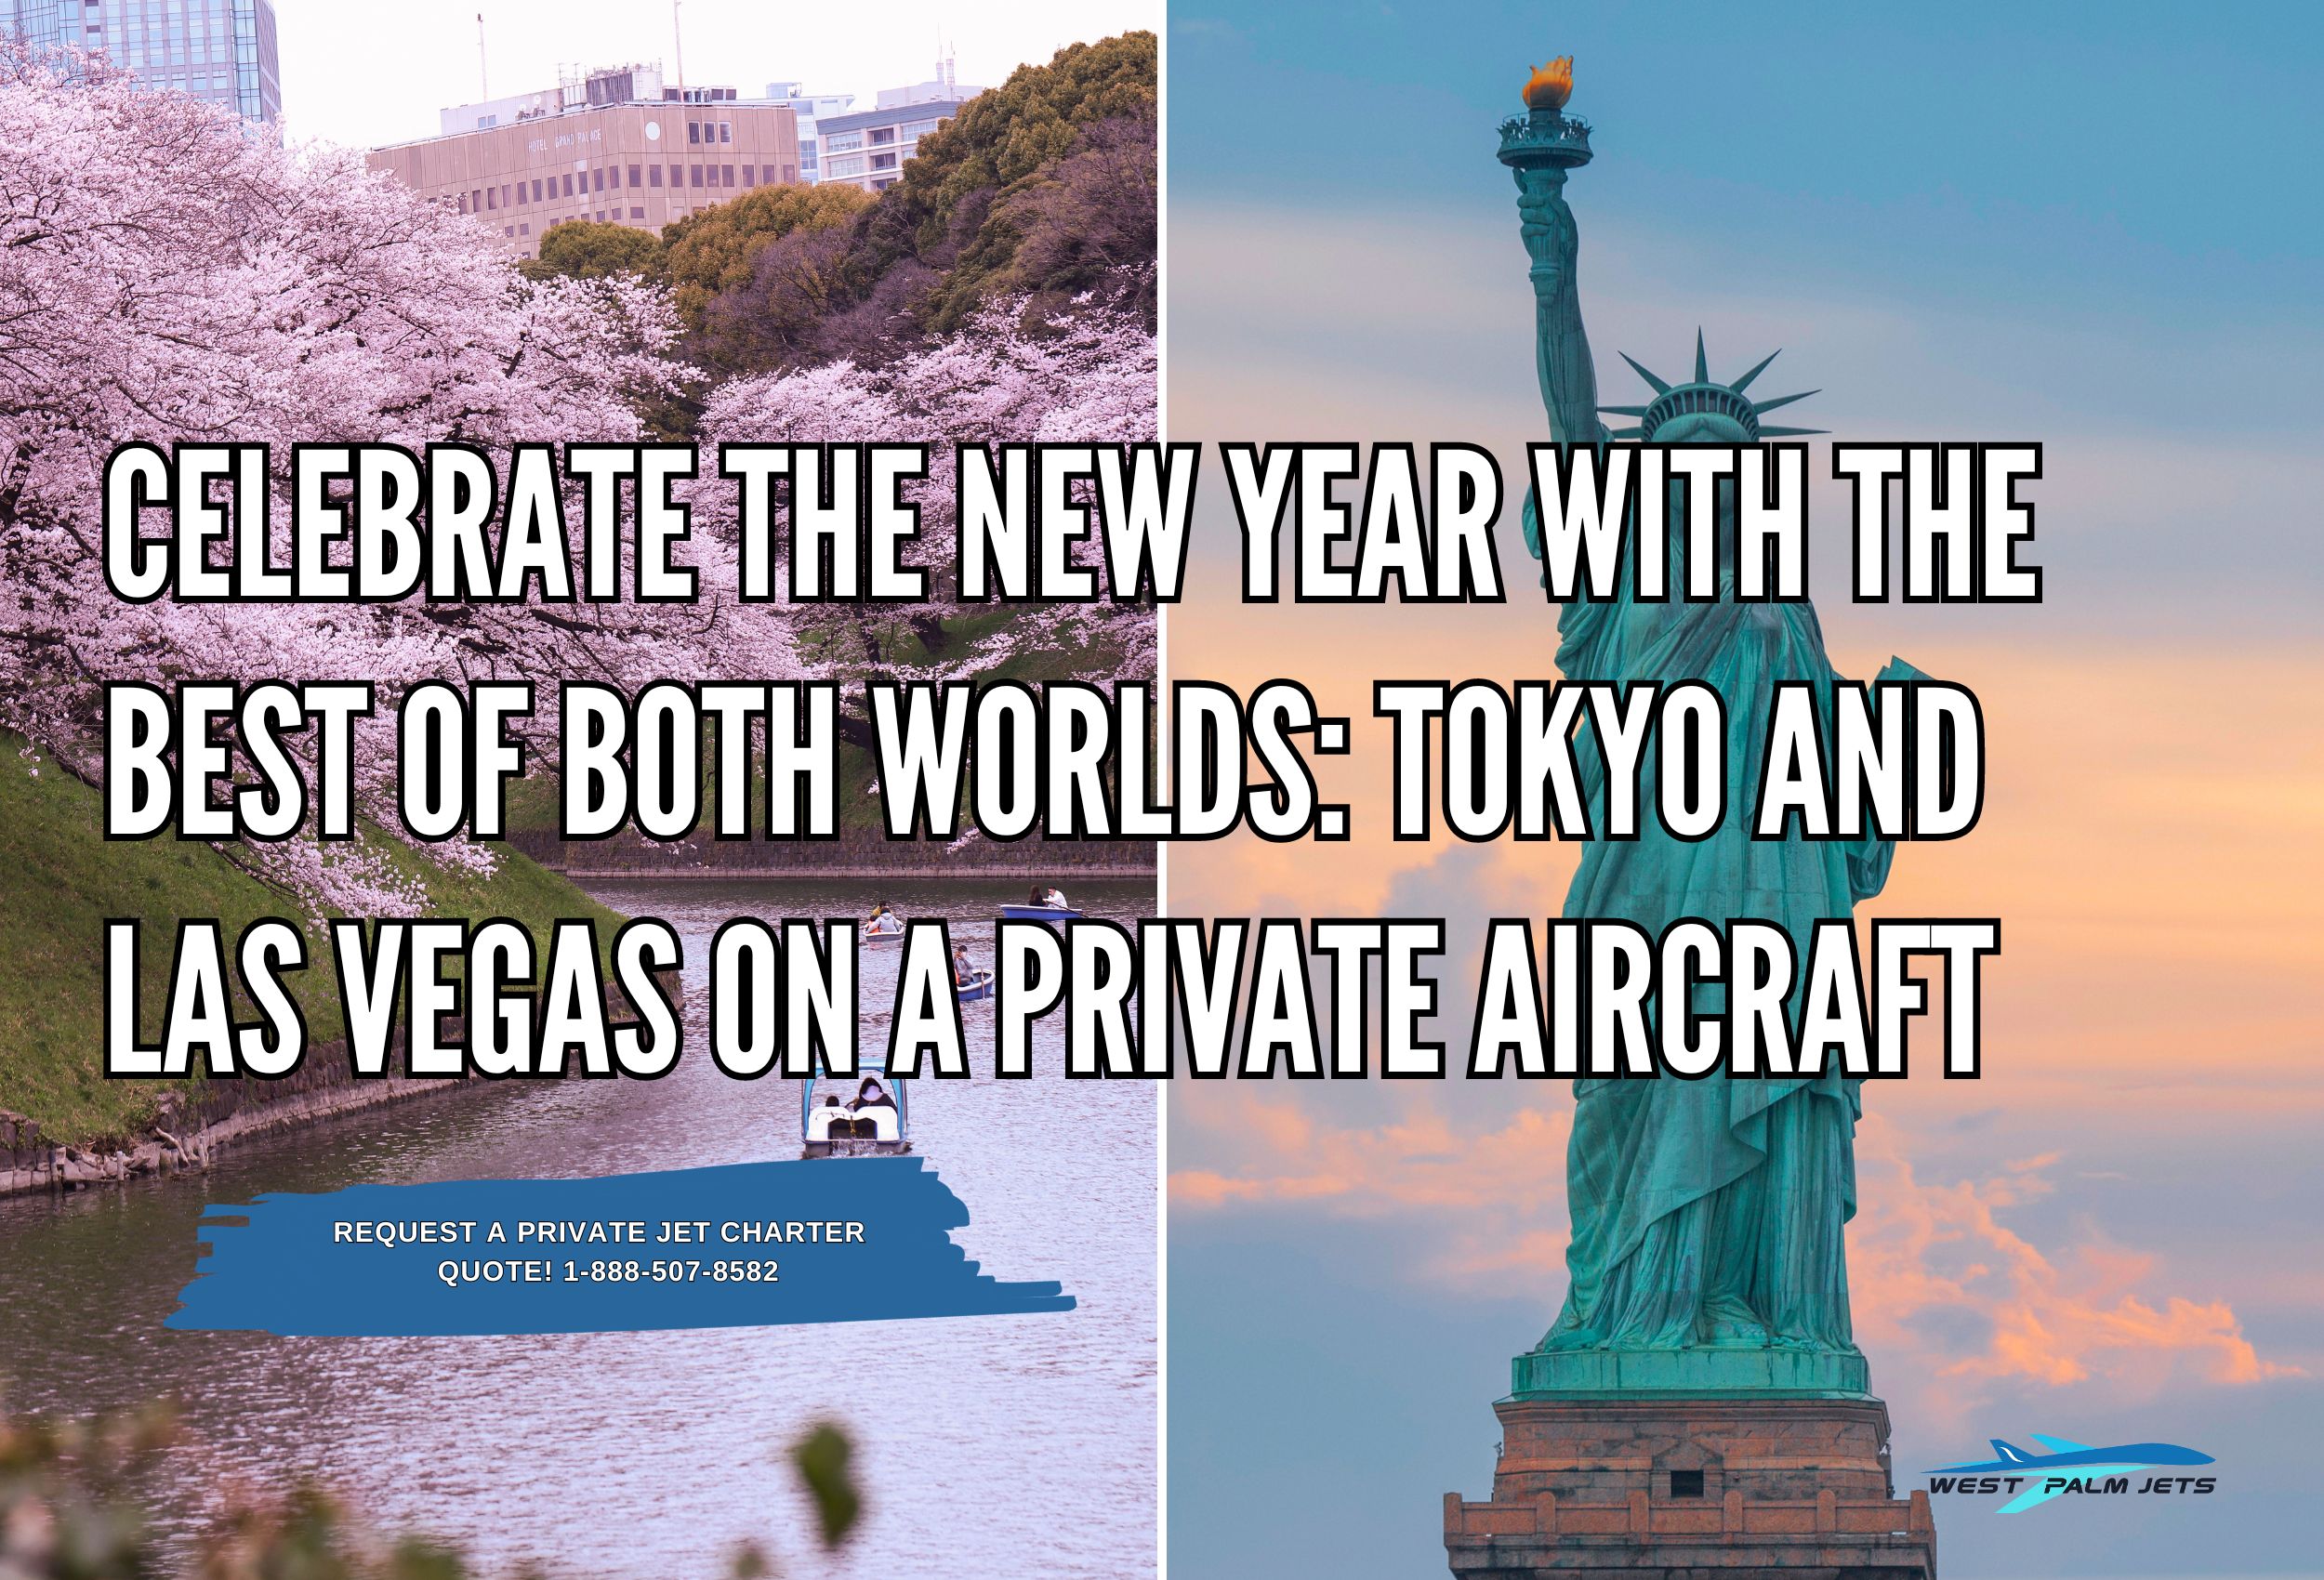 Celebrate The New Year with The Best Of Both Worlds Tokyo and Las Vegas on a Private Aircraft (1)